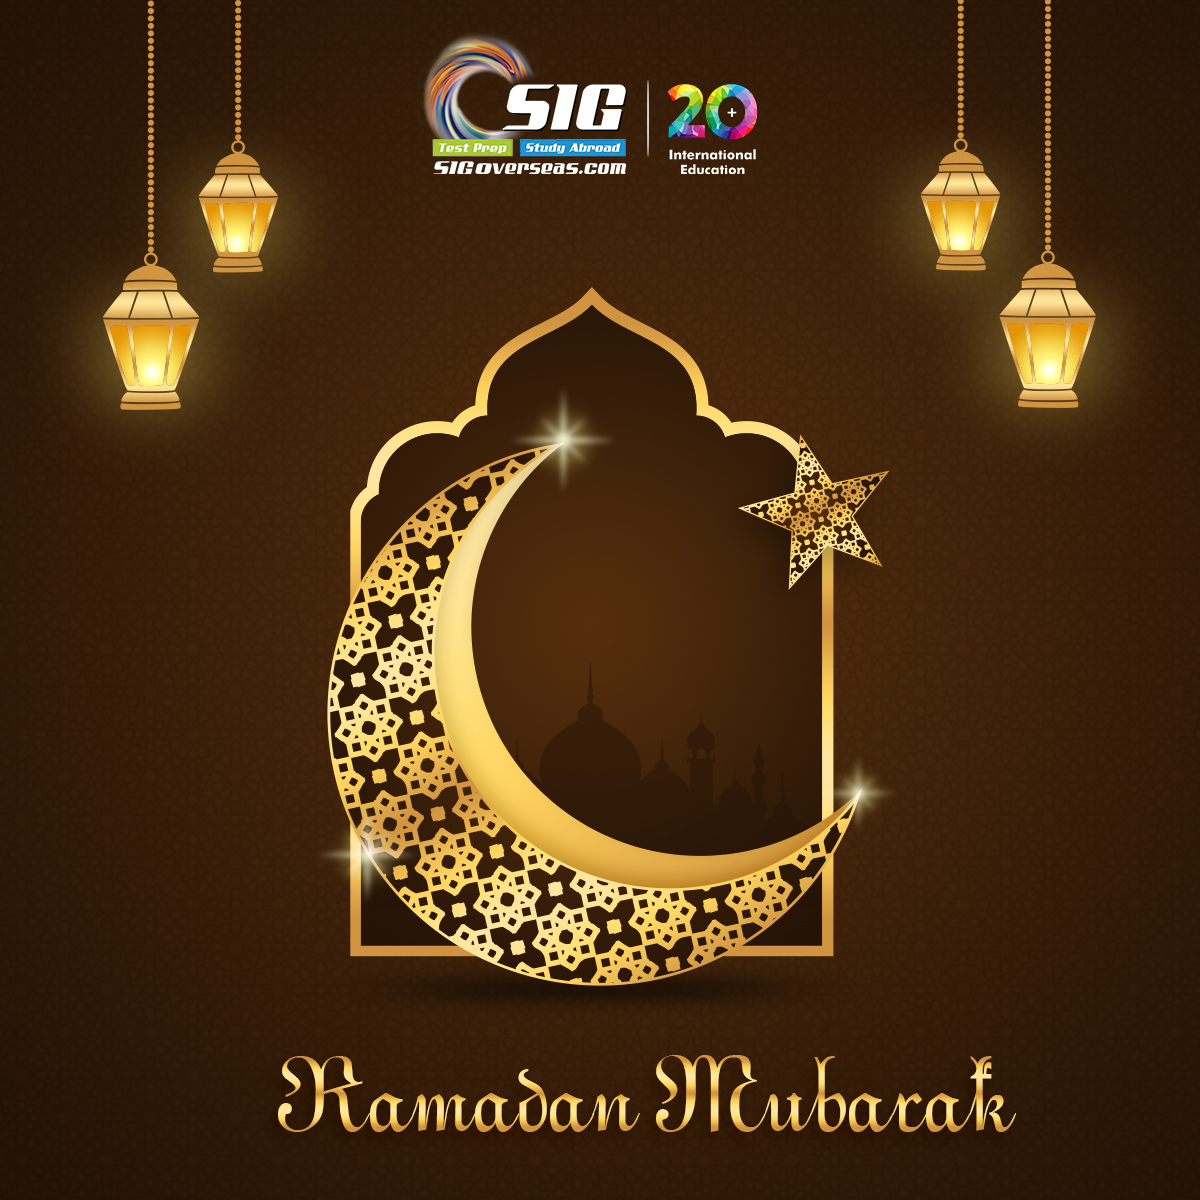 May Allah is always there to shower you with his #blessings and empower you with #courage and #knowledge for a #successful tomorrow…. Wishing a #very Happy Ramadan!!!

#HappyRamadan #ramadan #festival #ramadanfestival #2022ramadan #FestivalMoments #Festive #love #allah